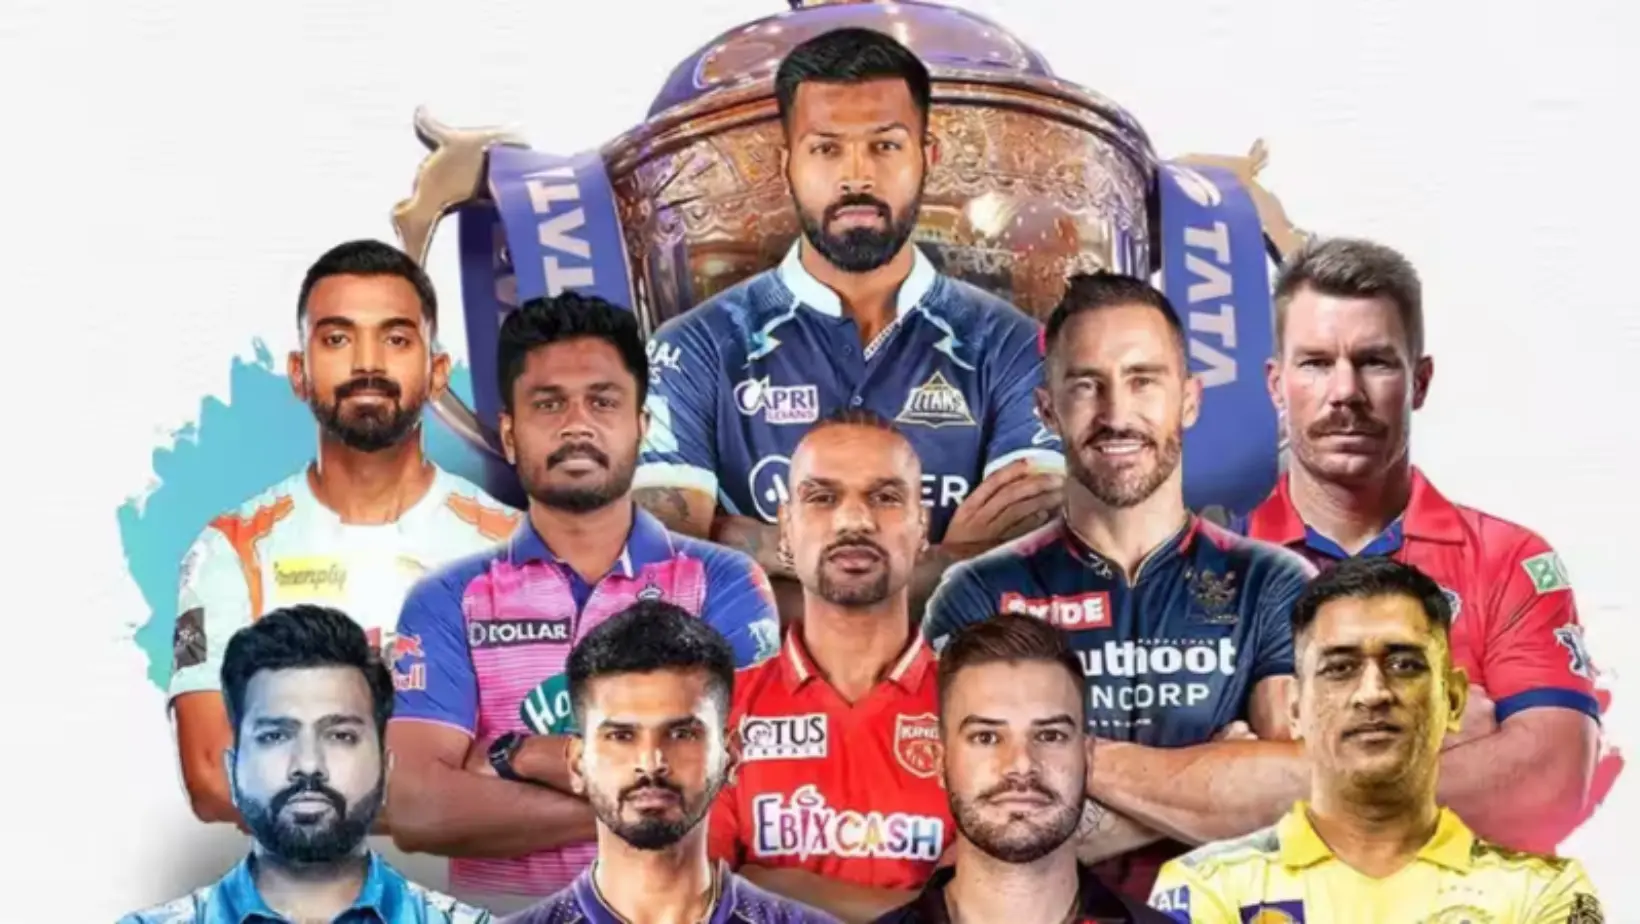 Rajkotupdates.news : Tata-group-takes-the-rights-for-the-2022-and-2023-ipl-seasons